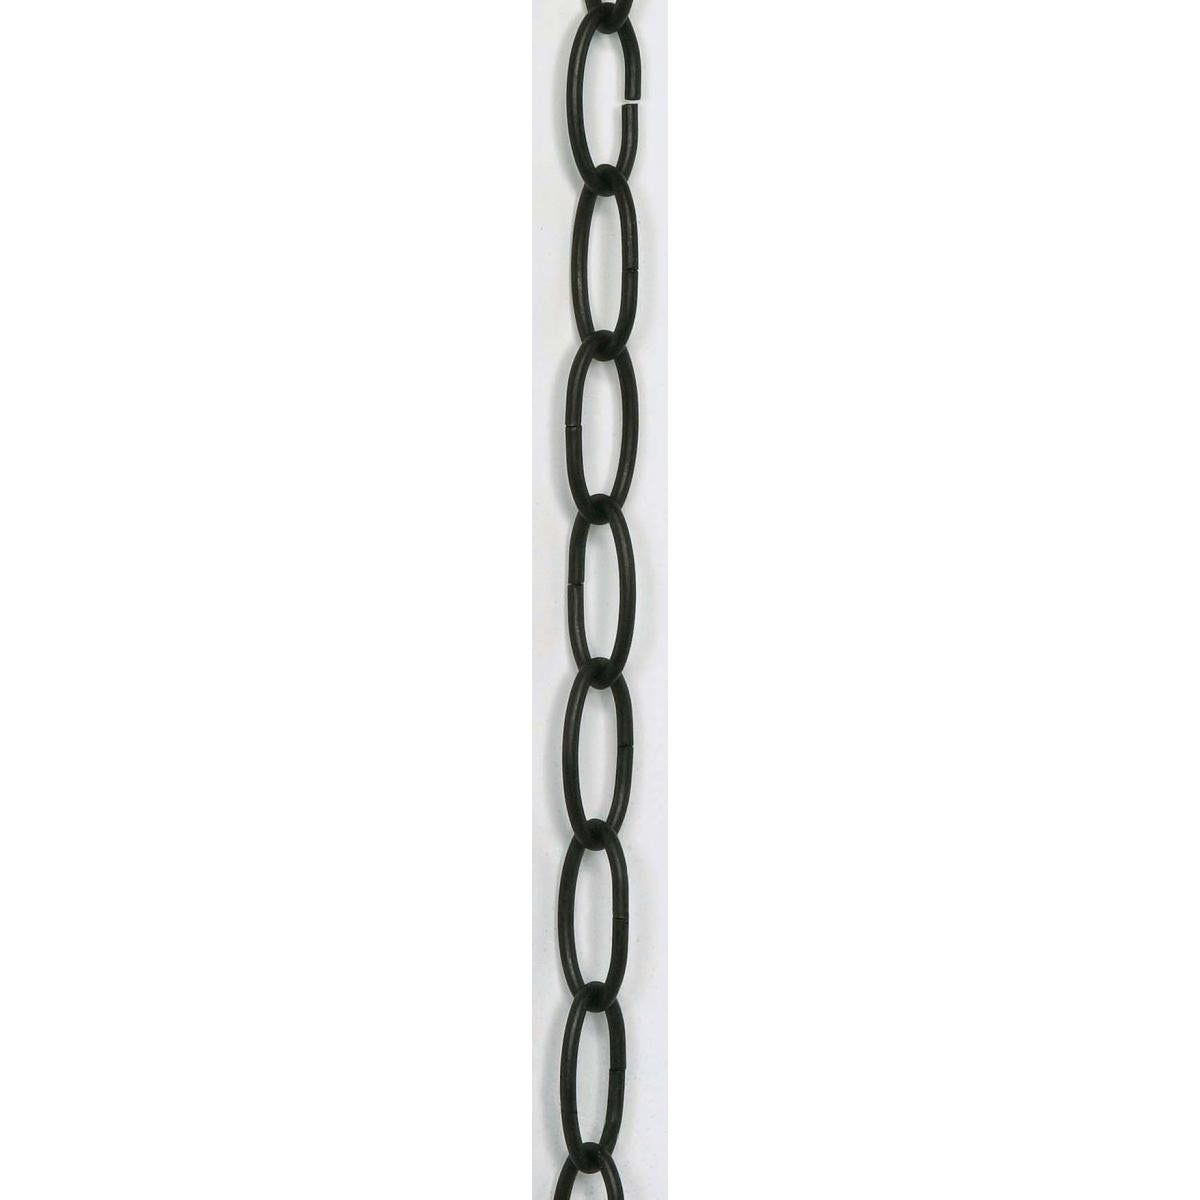 Satco 25-1067 8 Ga. Chain; Old Bronze Finish; 1-1/2 in.; Link Len; 7/8 in.; Link Wid; 1/8 in.; Thick; 1 yd. Len; 24 yd./Ctn; 35lbs Max